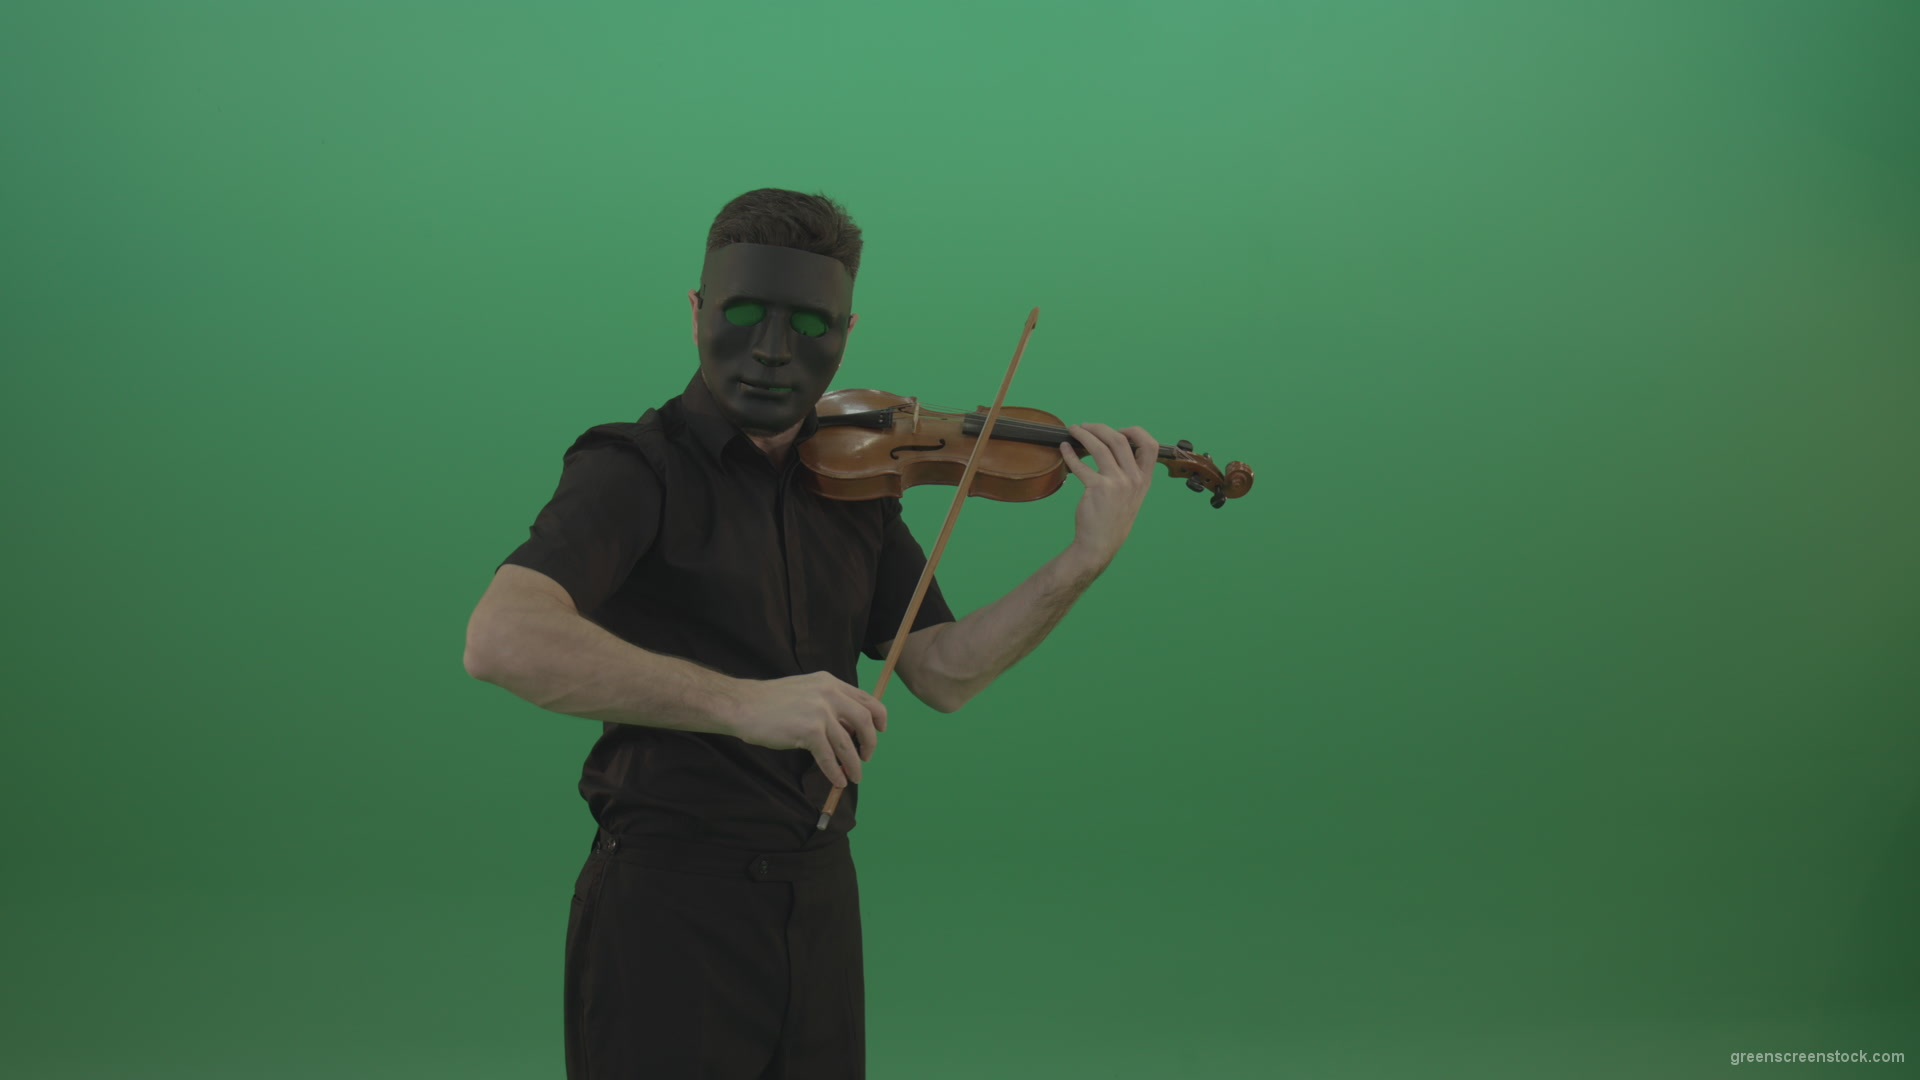 Man-in-black-wear-and-mask-play-violin-fiddle-strings-gothic-dark-music-isolated-on-green-screen_004 Green Screen Stock